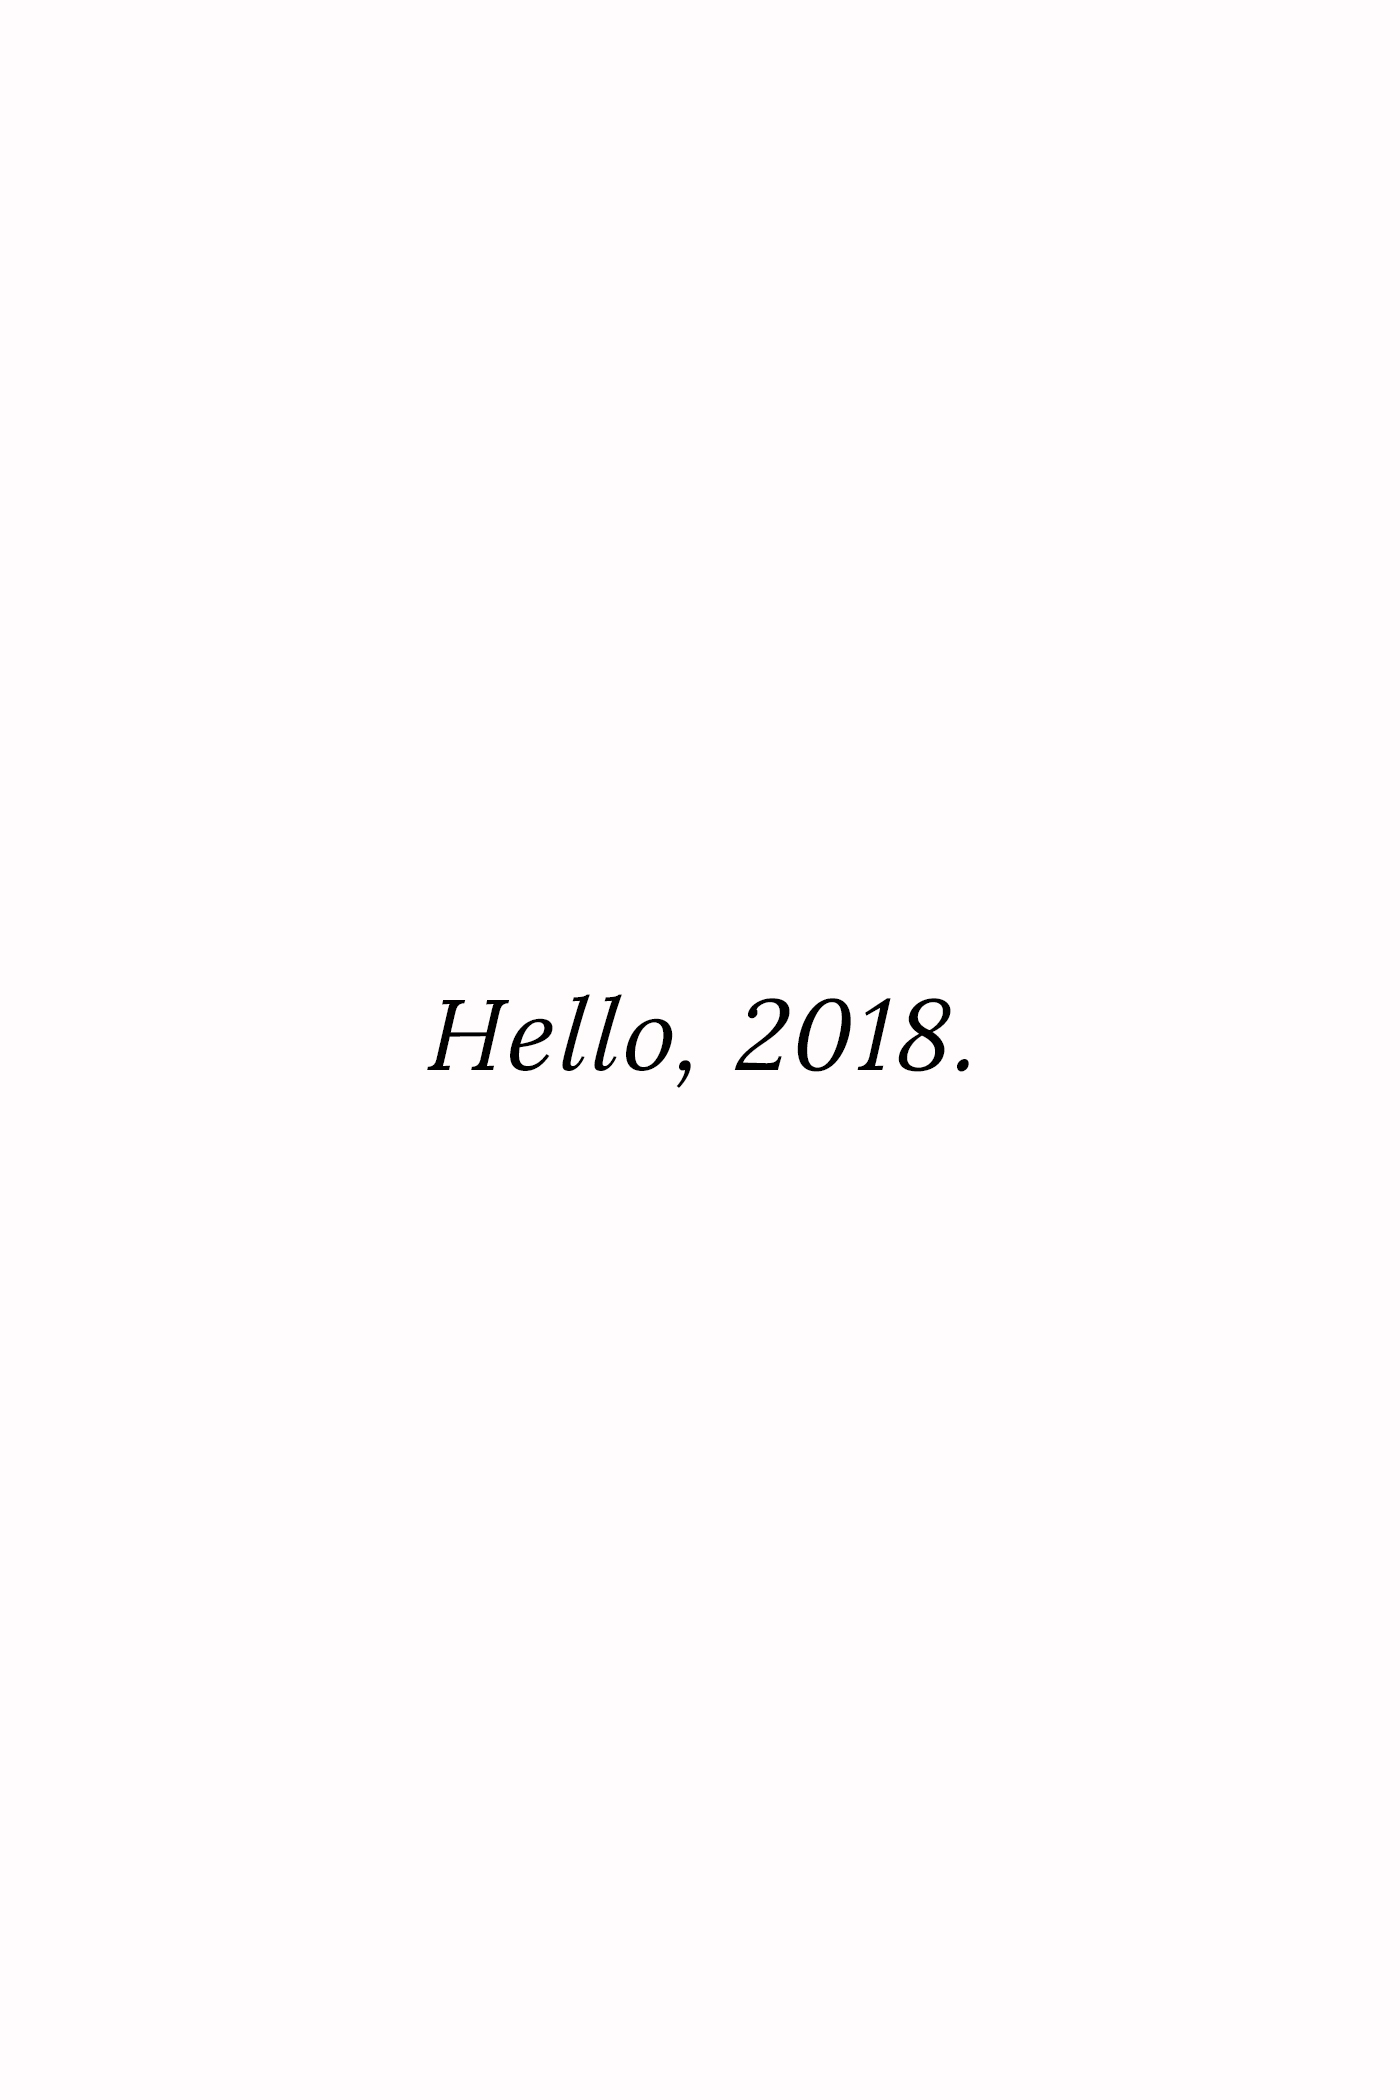 Goals for 2018 / 2018 New Year's Resolutions at www.hejdoll.com